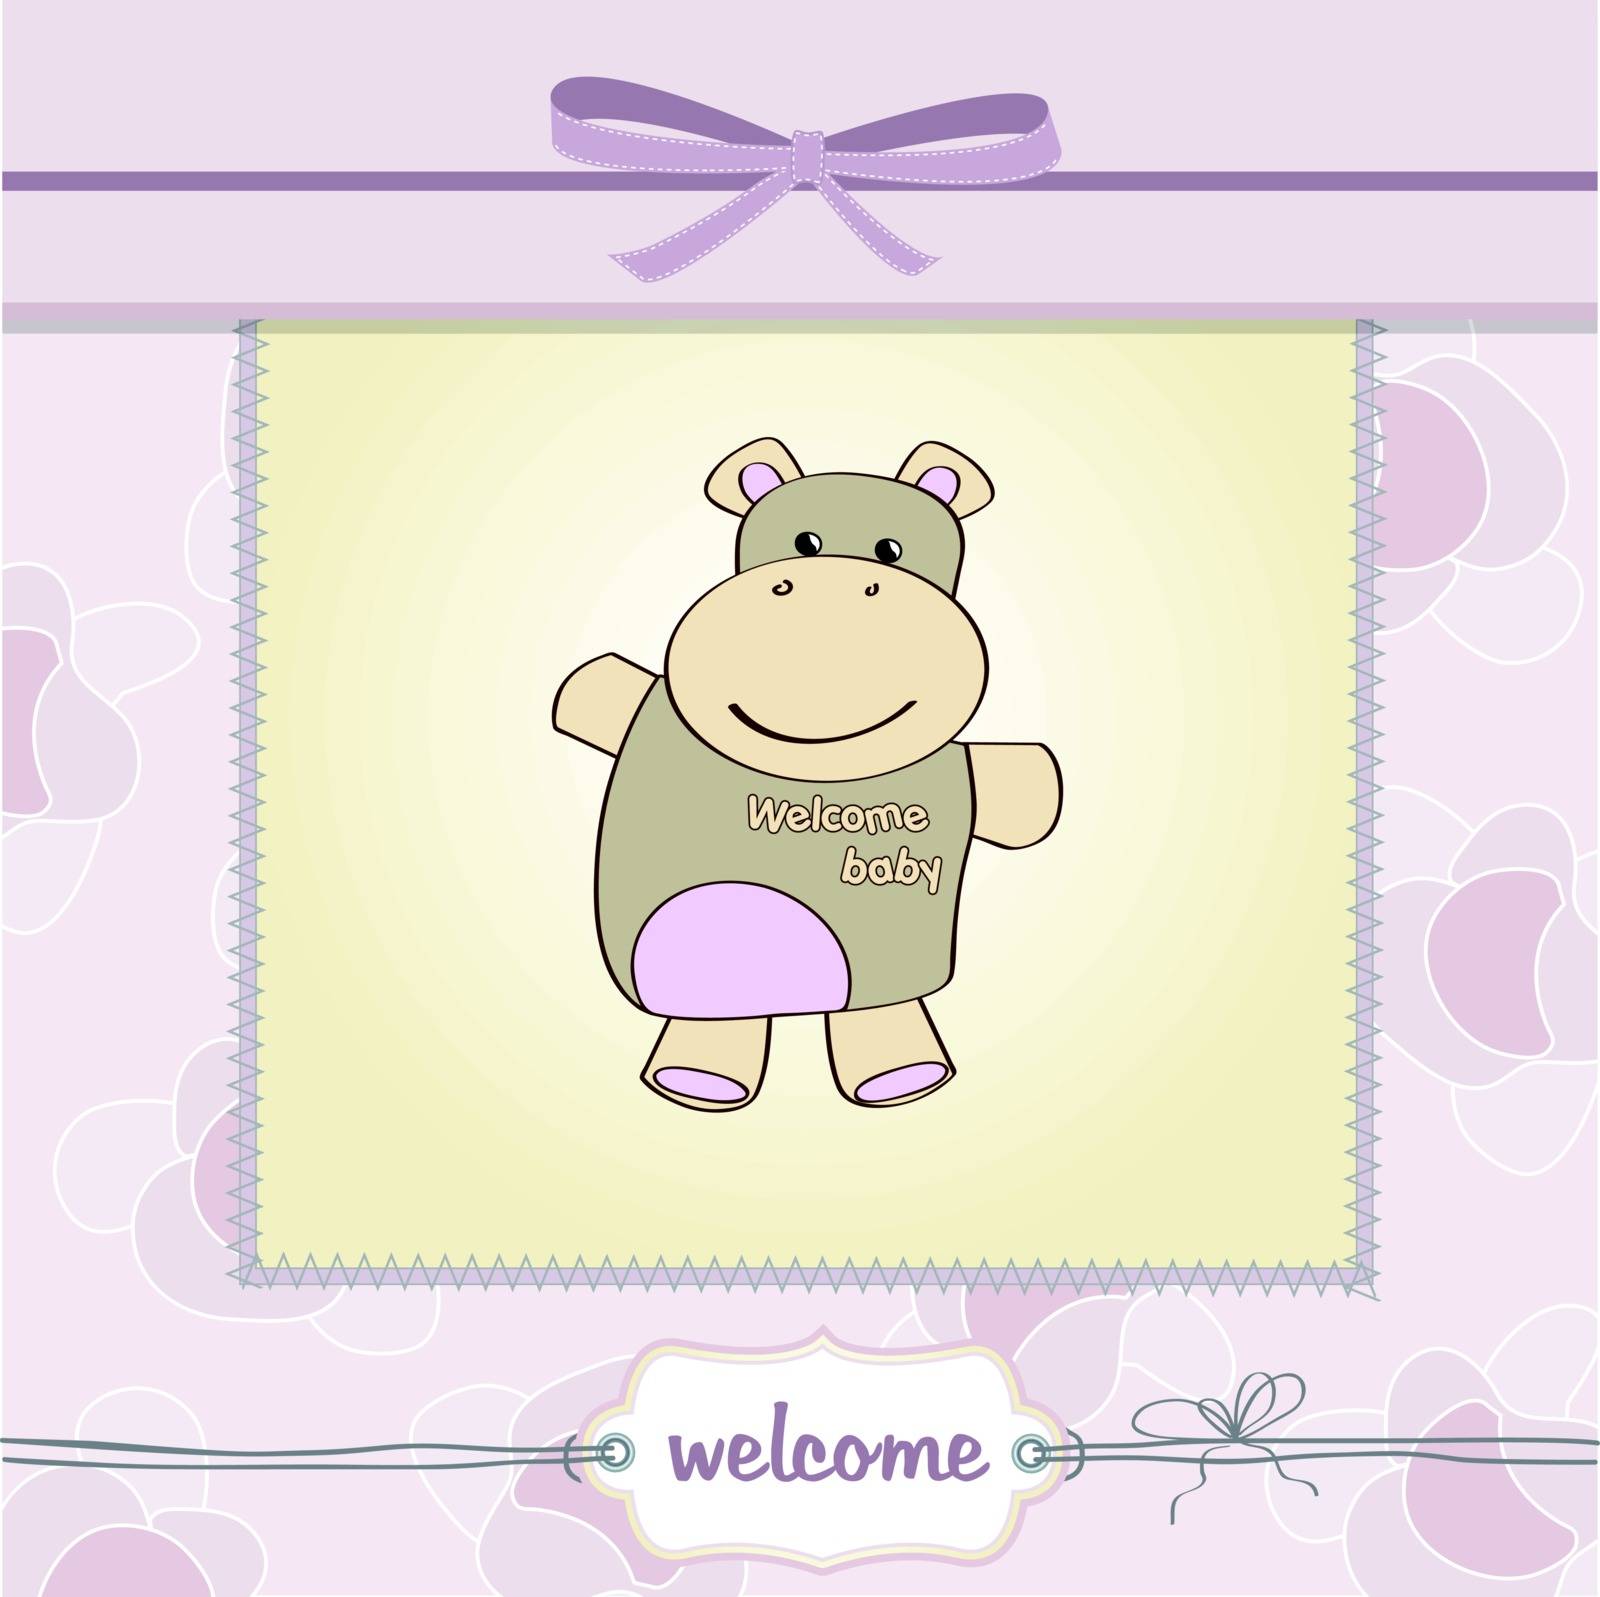 childish baby shower card with hippo toy by balasoiu